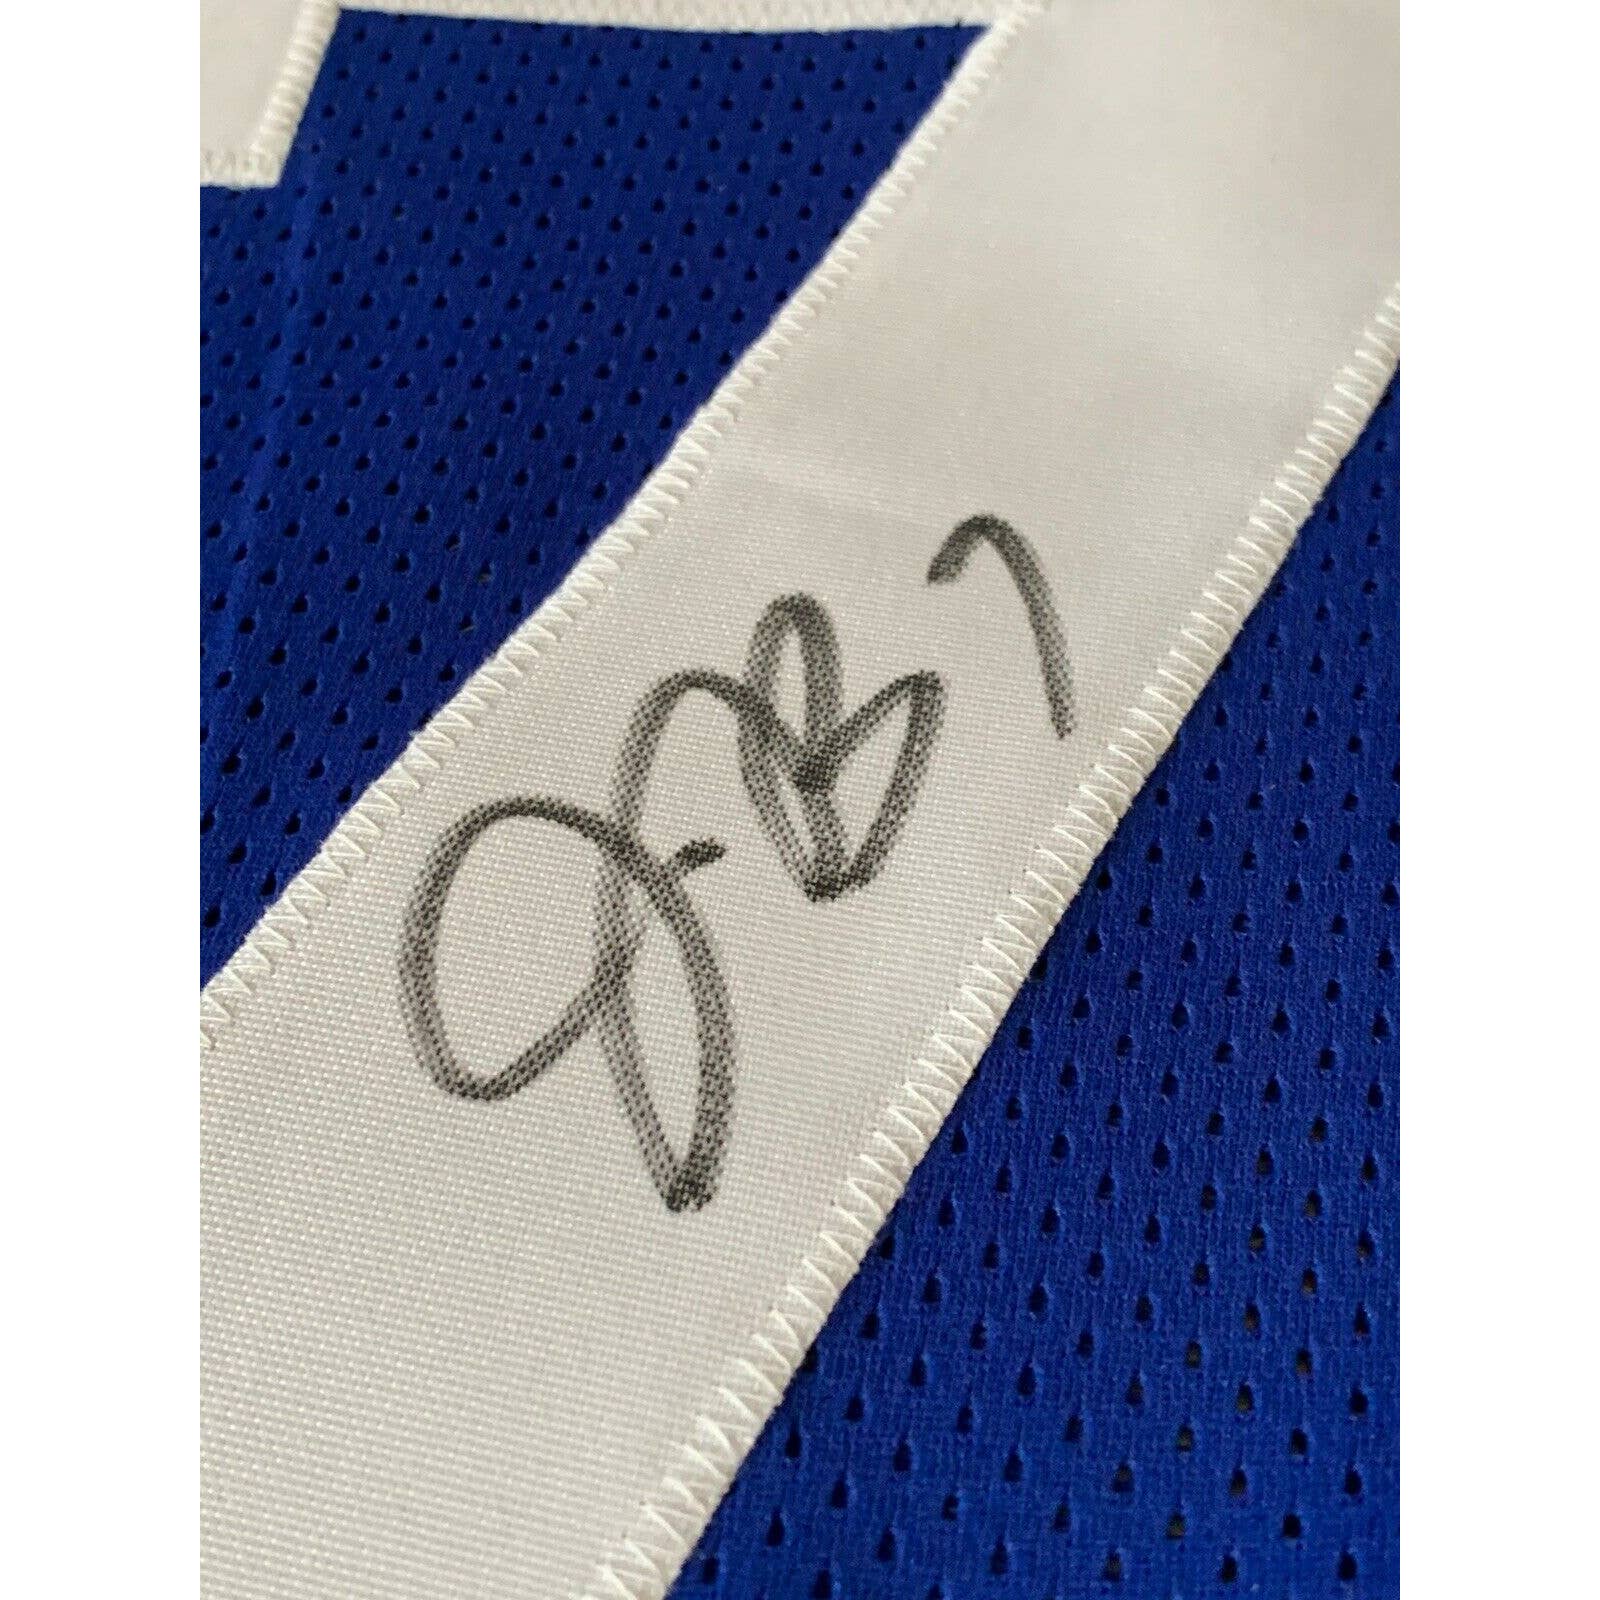 Jacoby Brissett Autographed/Signed Jersey JSA COA Indianapolis Colts - TreasuresEvolved